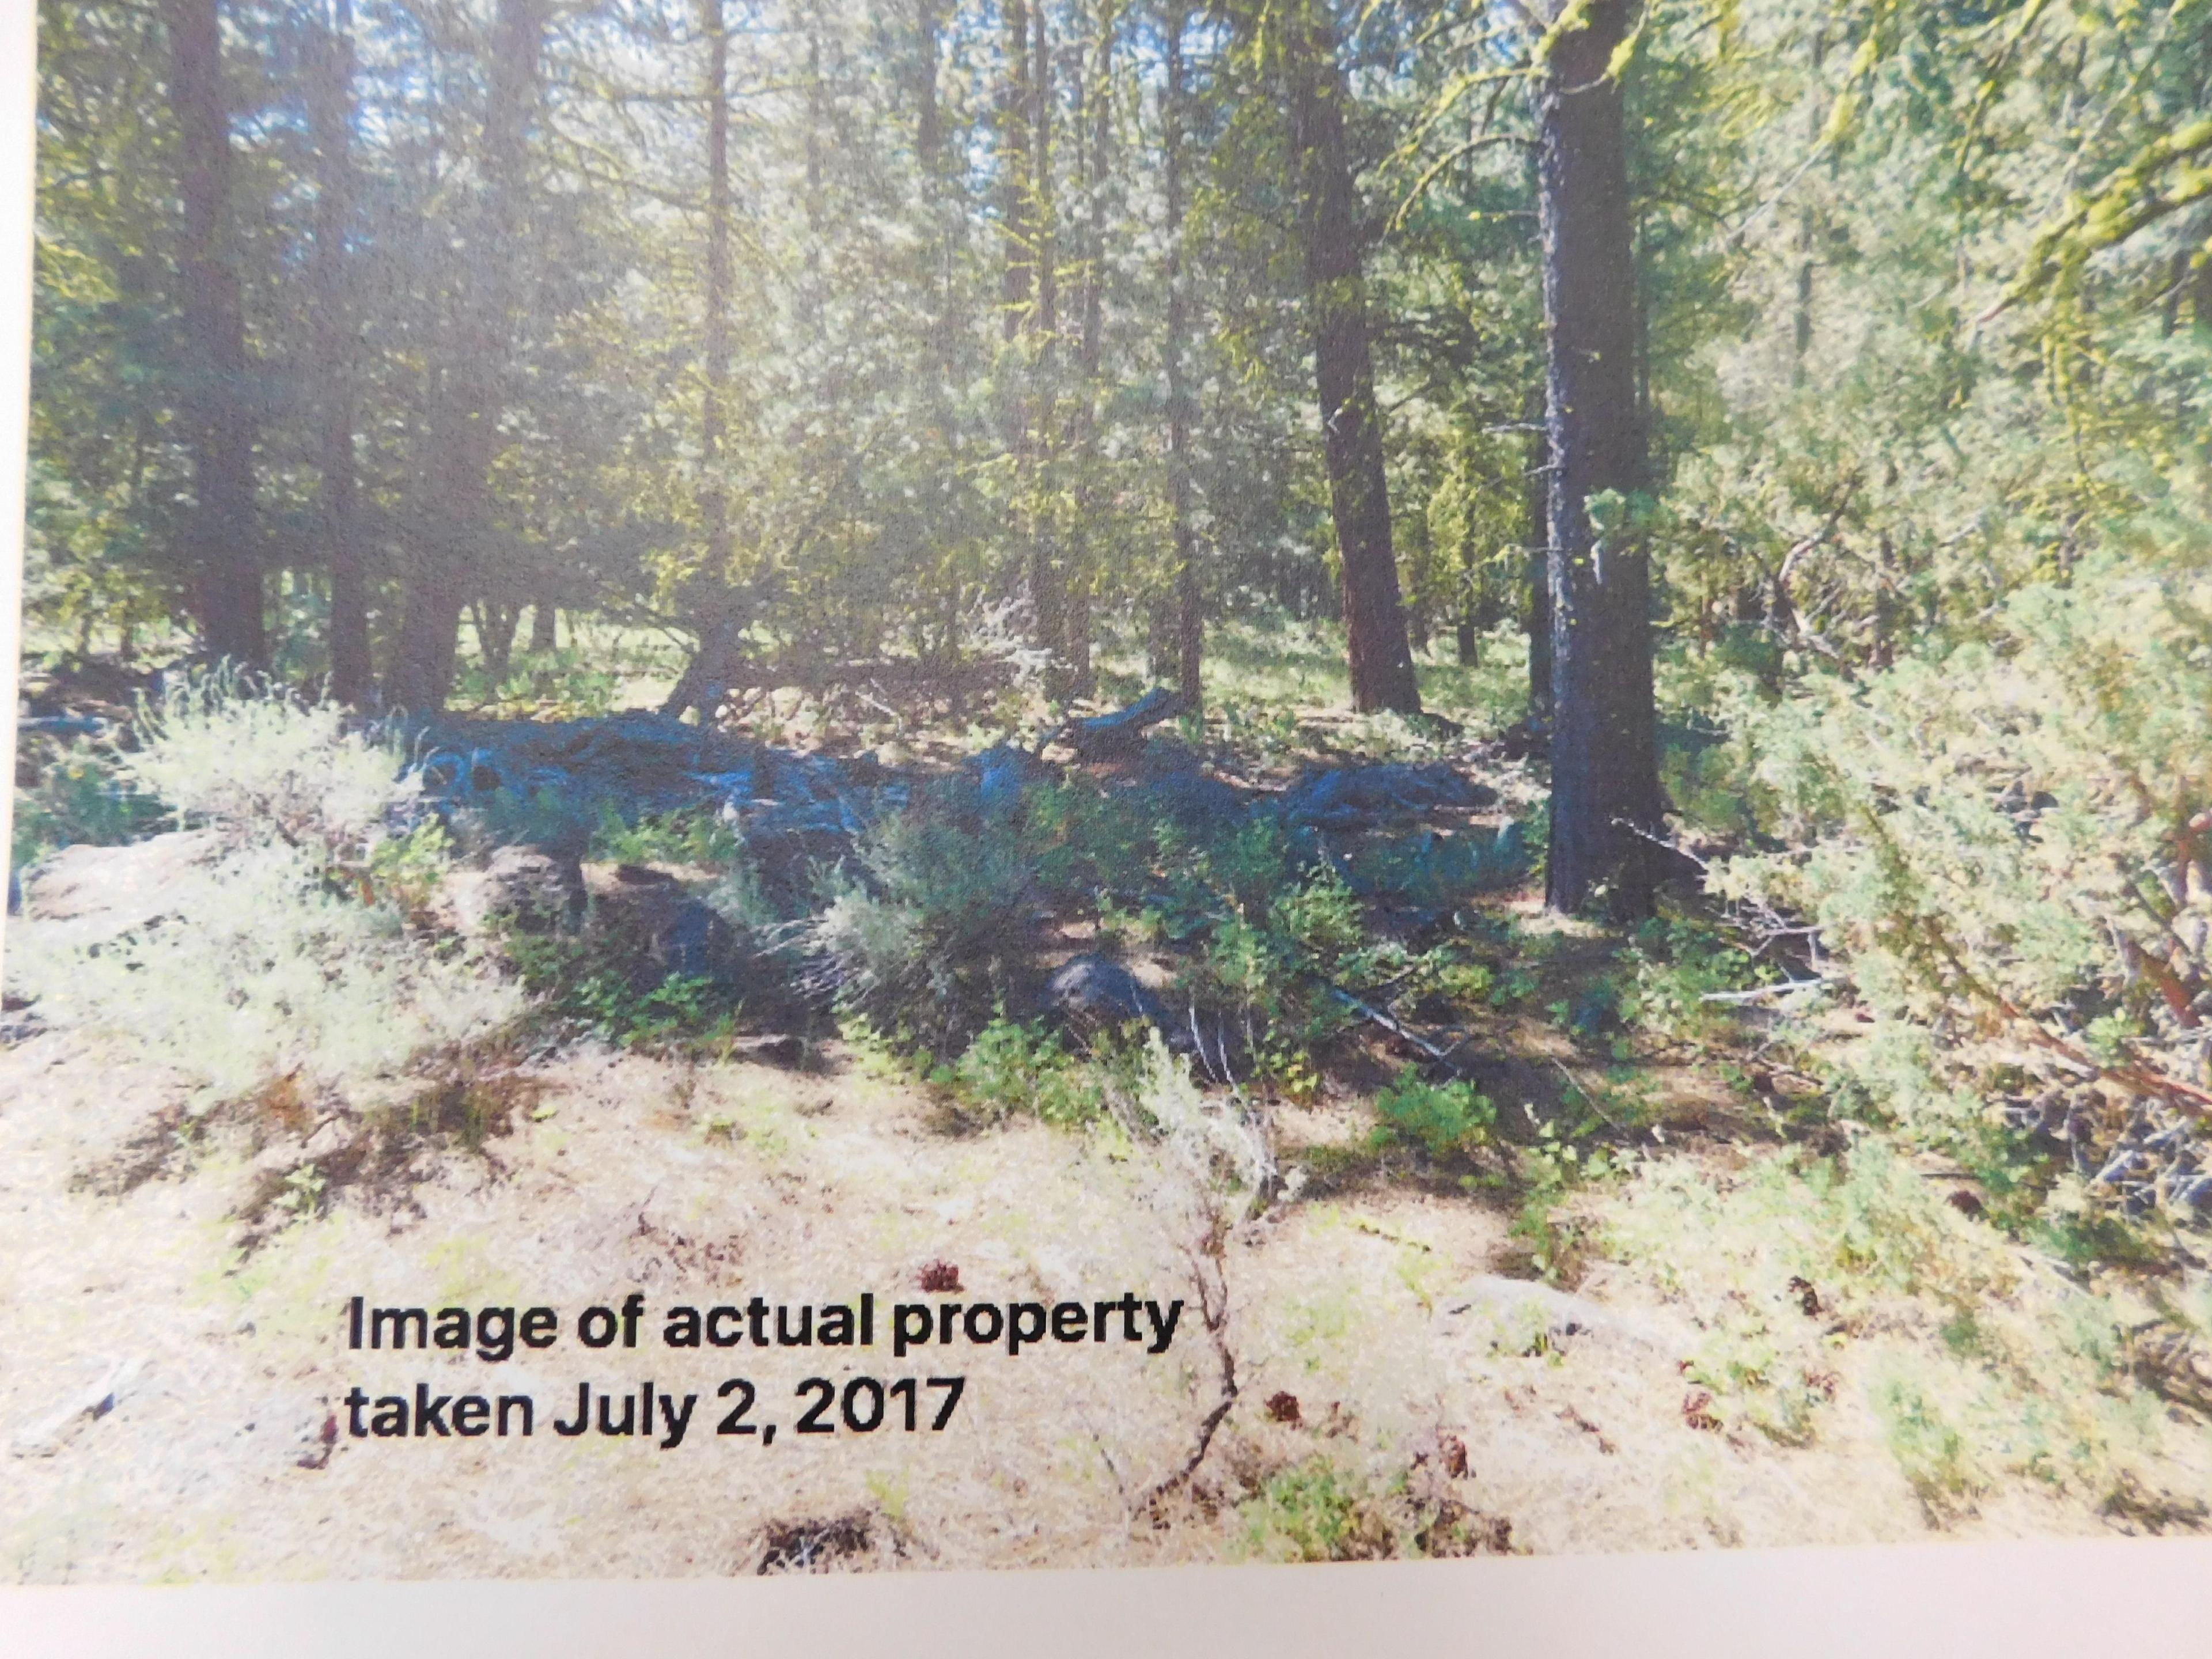 LOT#5 - 1 ACRE LOT MODOC COUNTY NEAR STOCKED FISHING POND